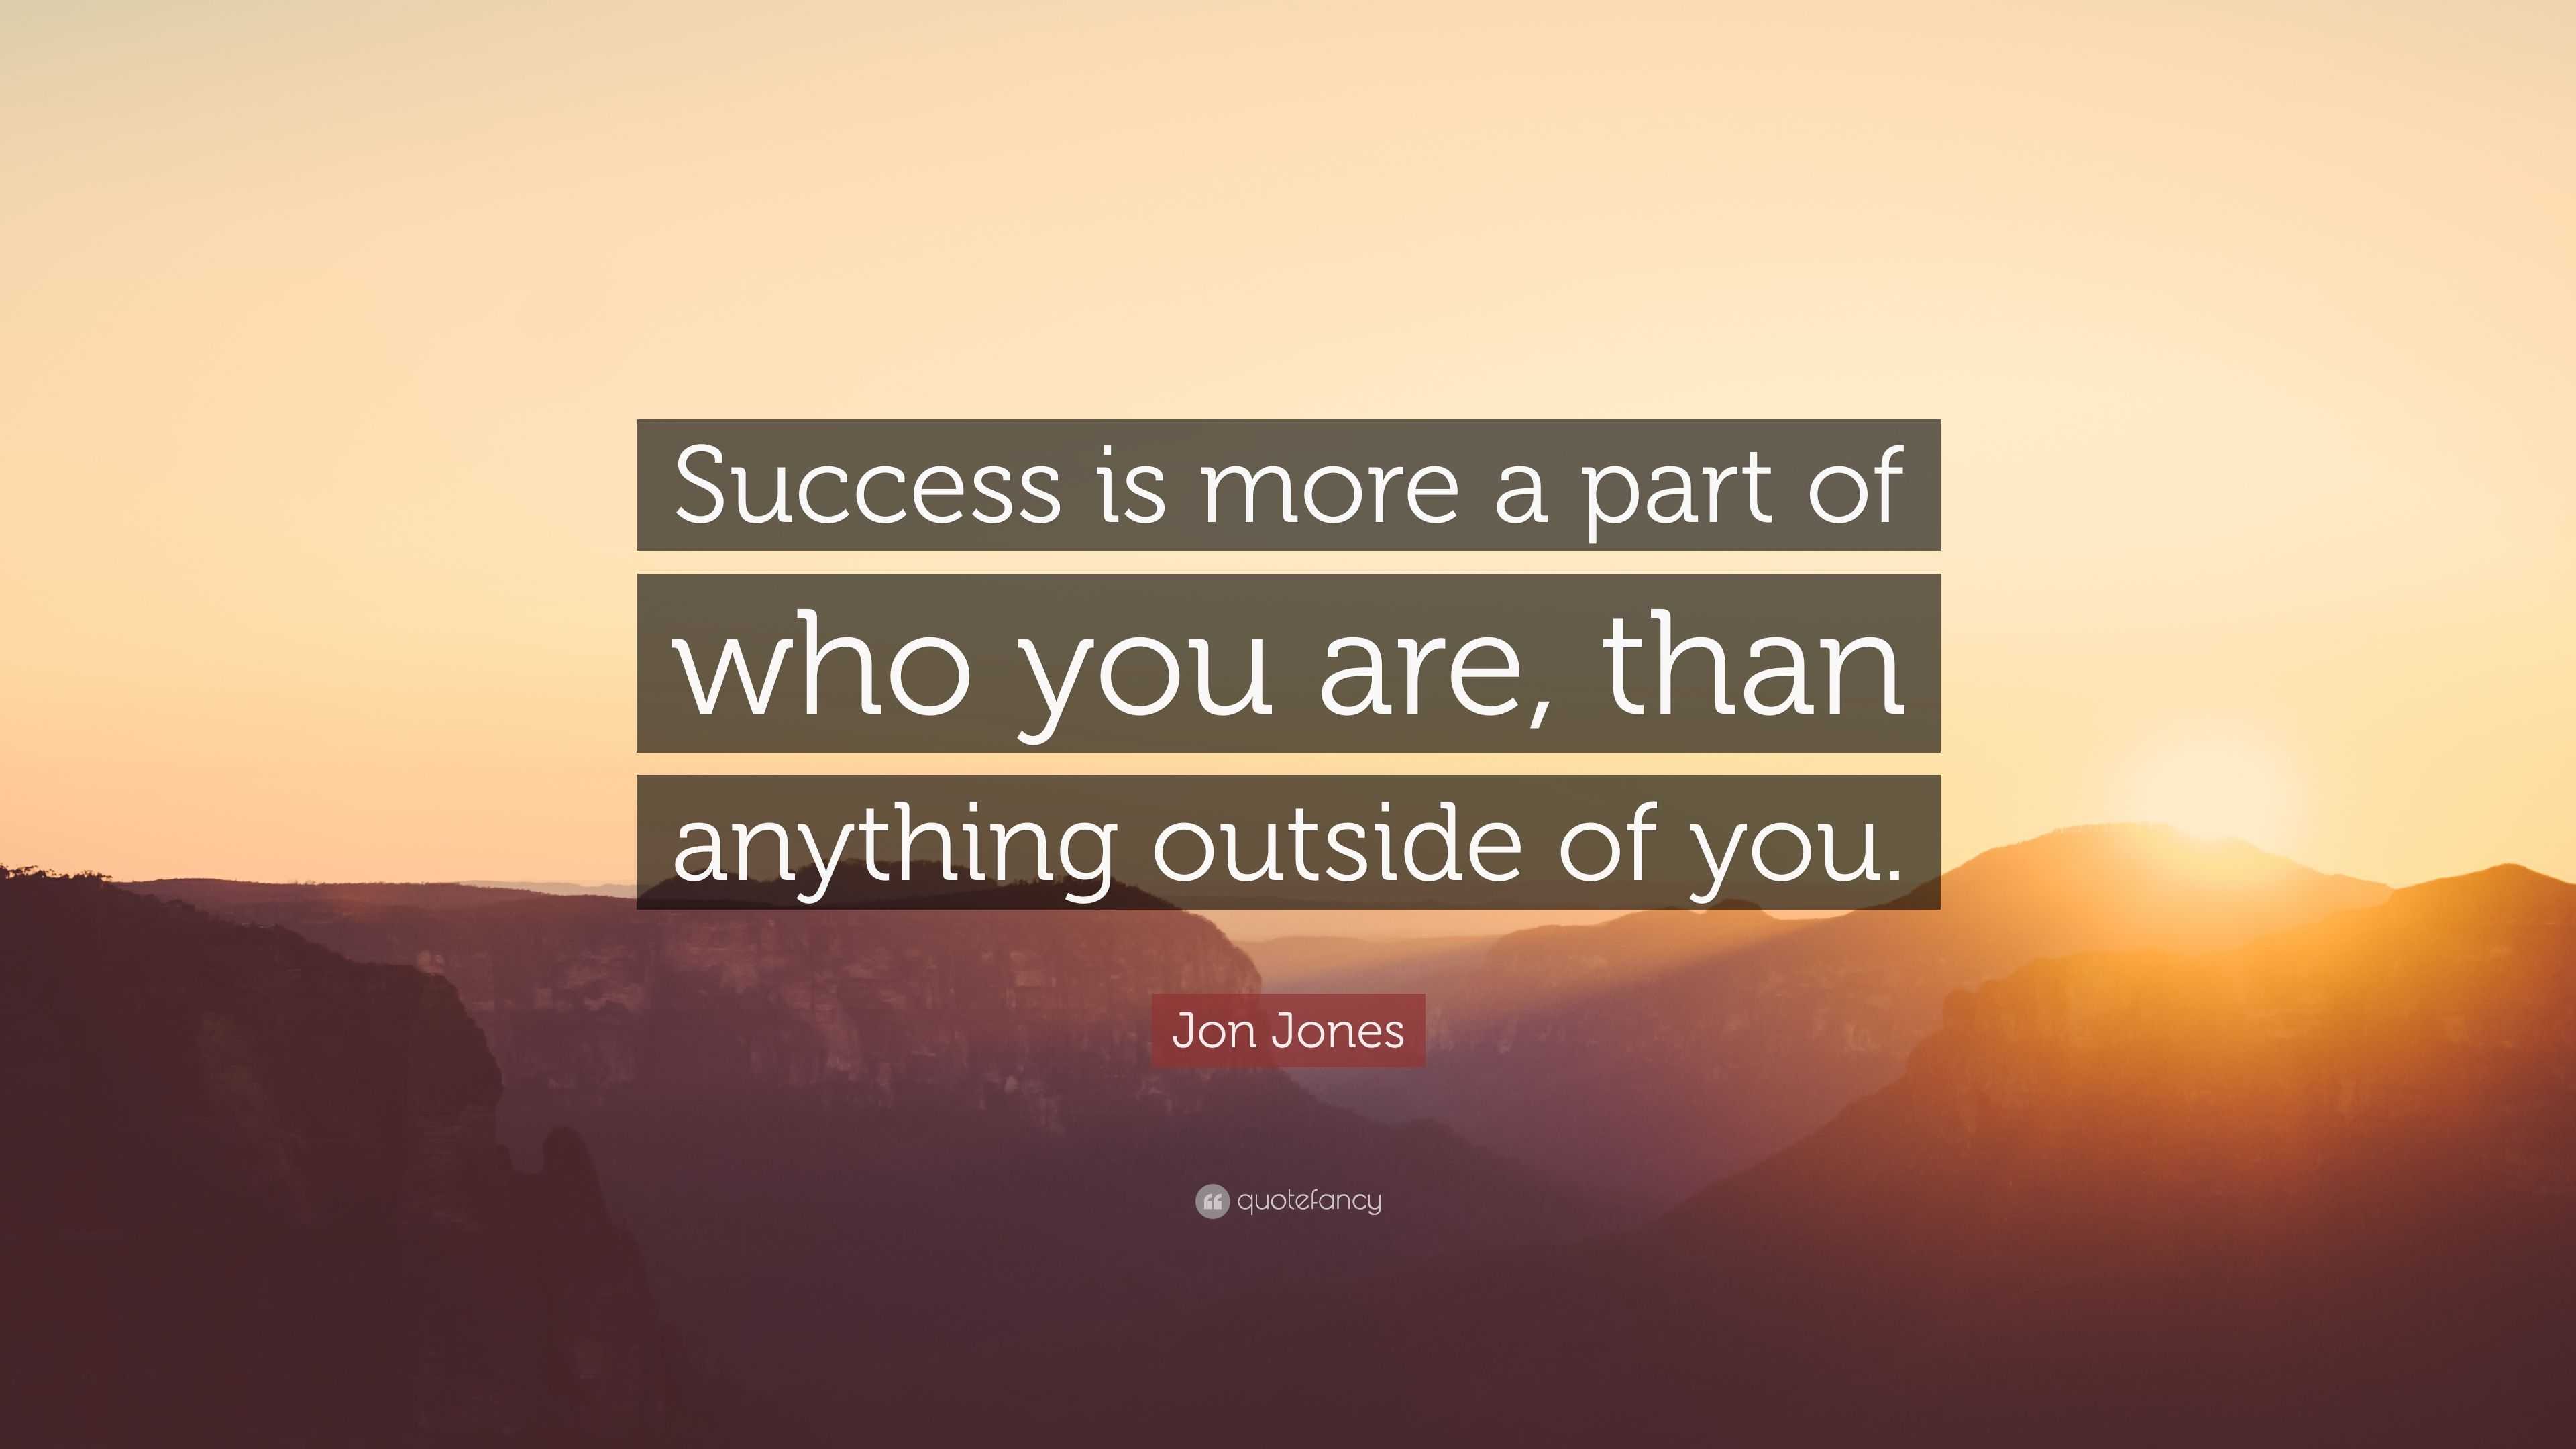 Jon Jones Quote: “Success is more a part of who you are, than anything ...